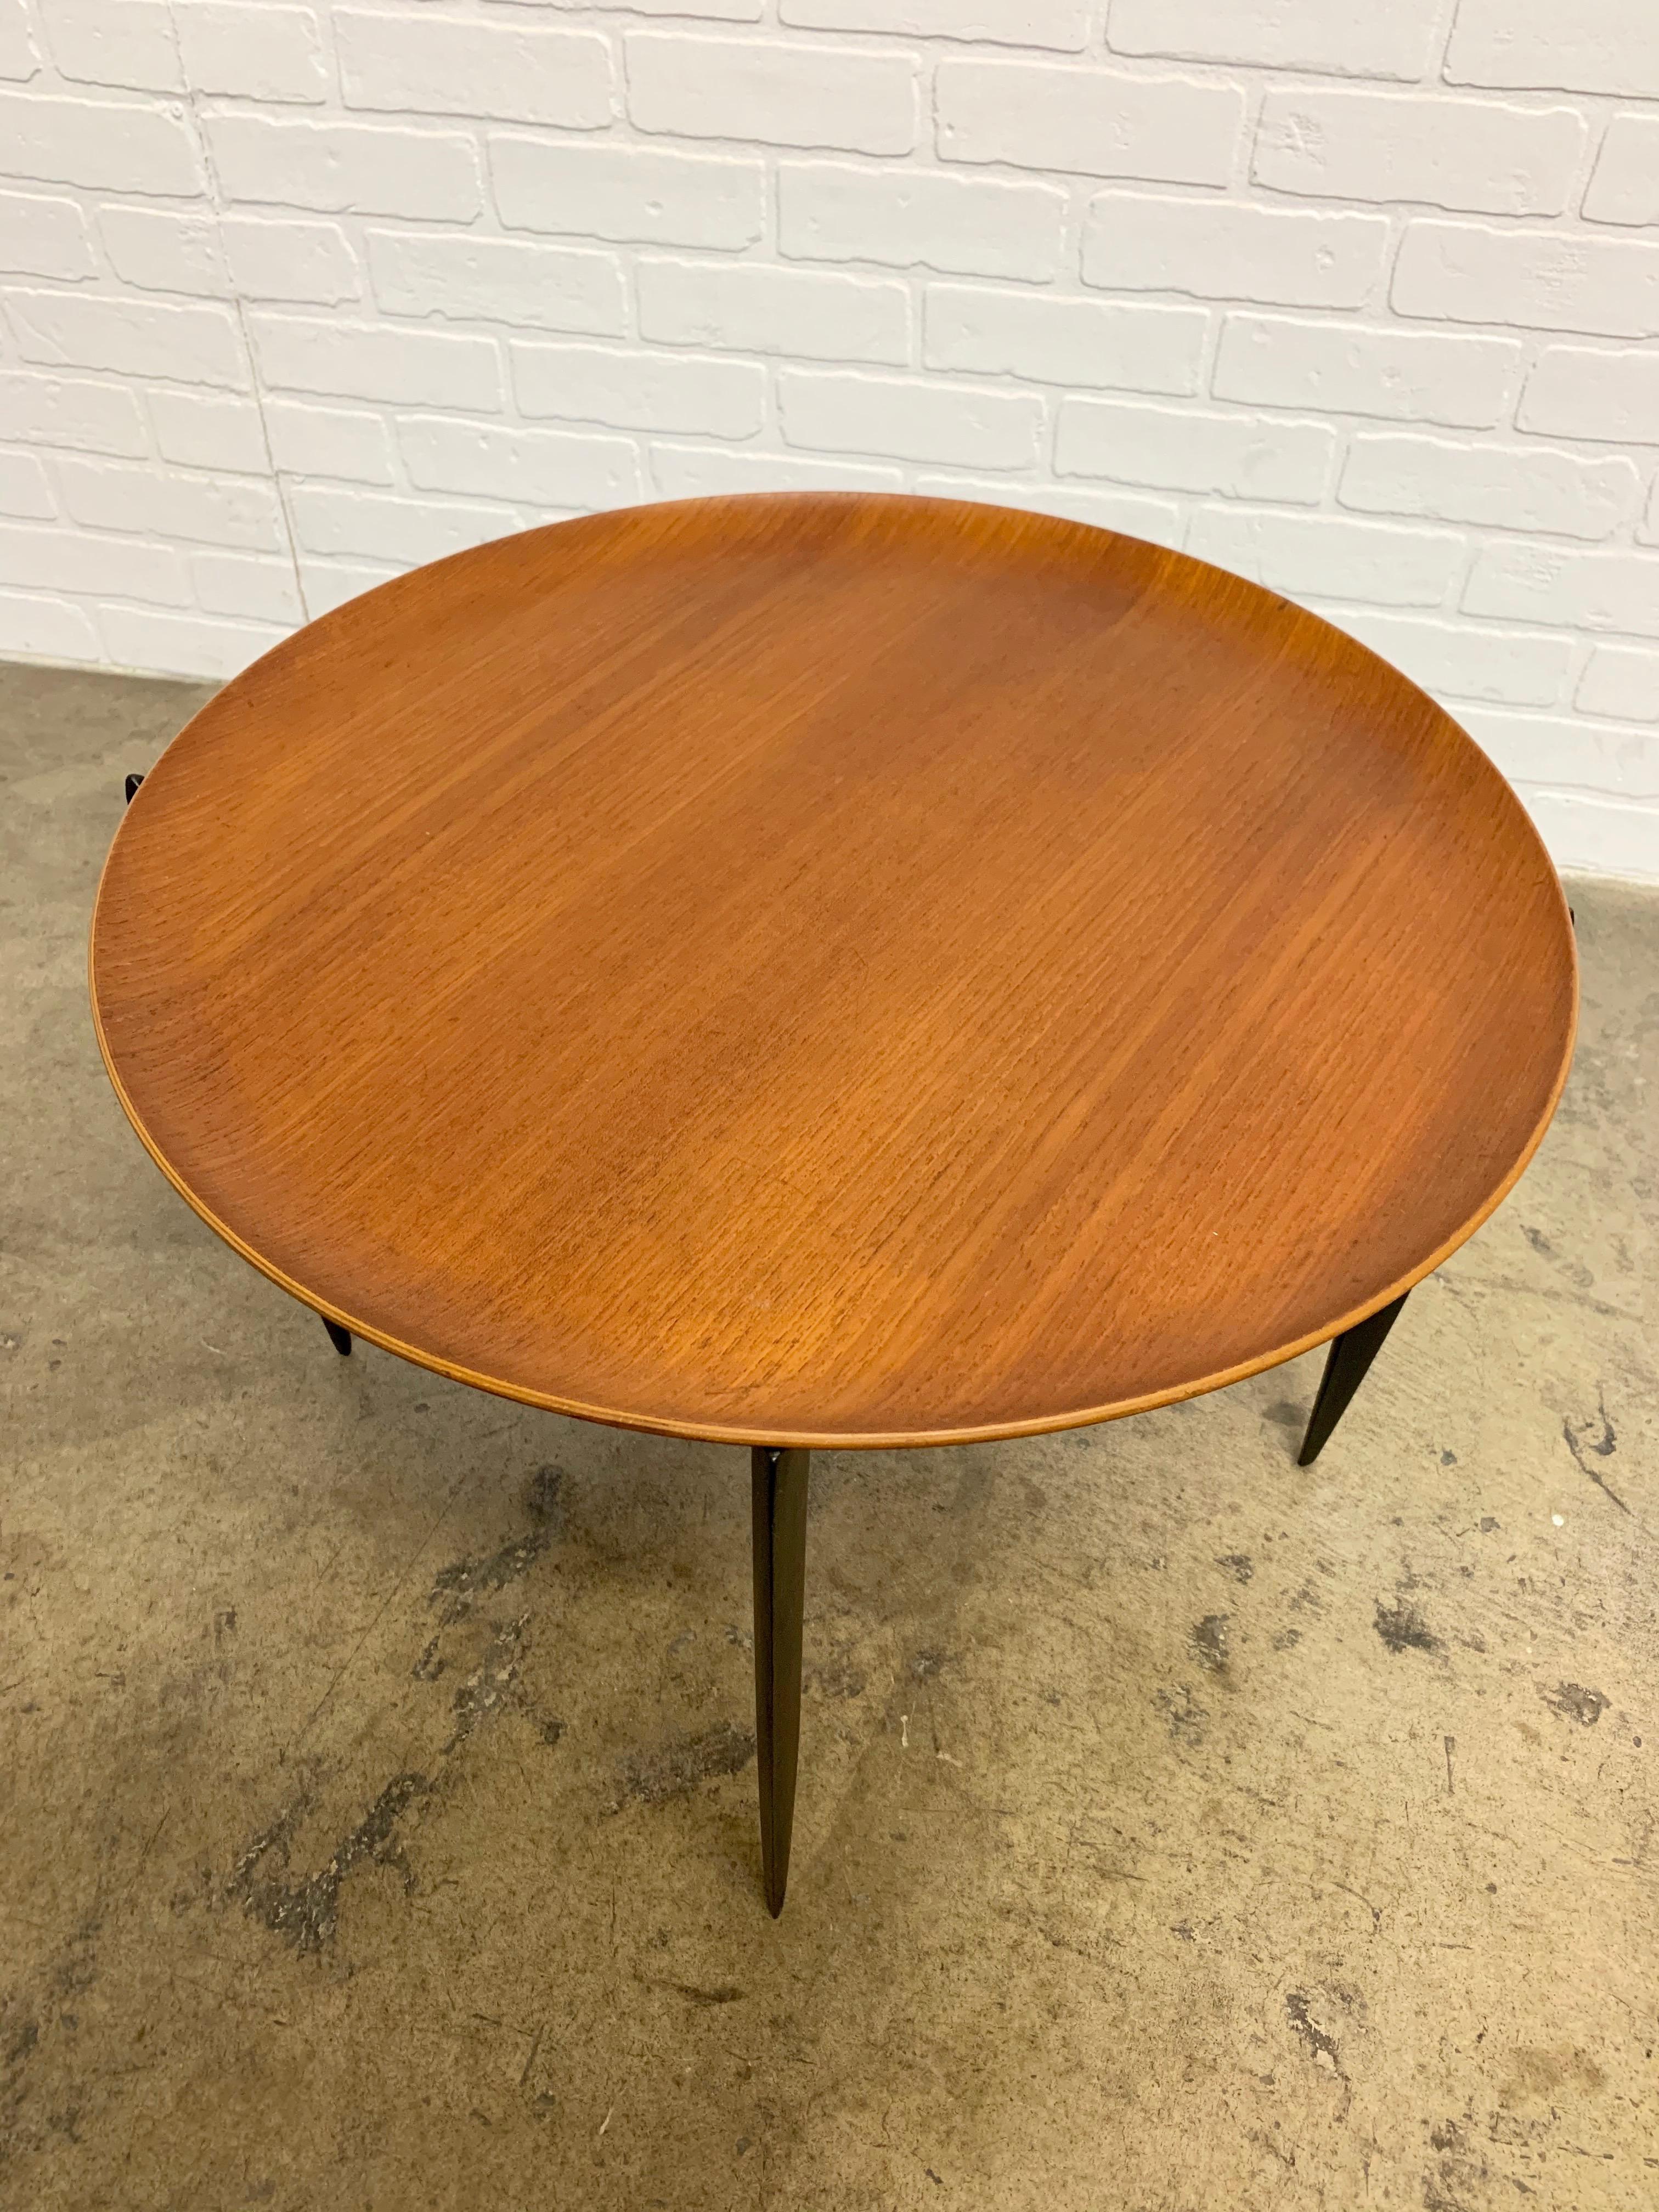 Scandinavian Modern Teak Tray Table by H Engholm and Svend Aage Willumsen for Fritz Hansen For Sale